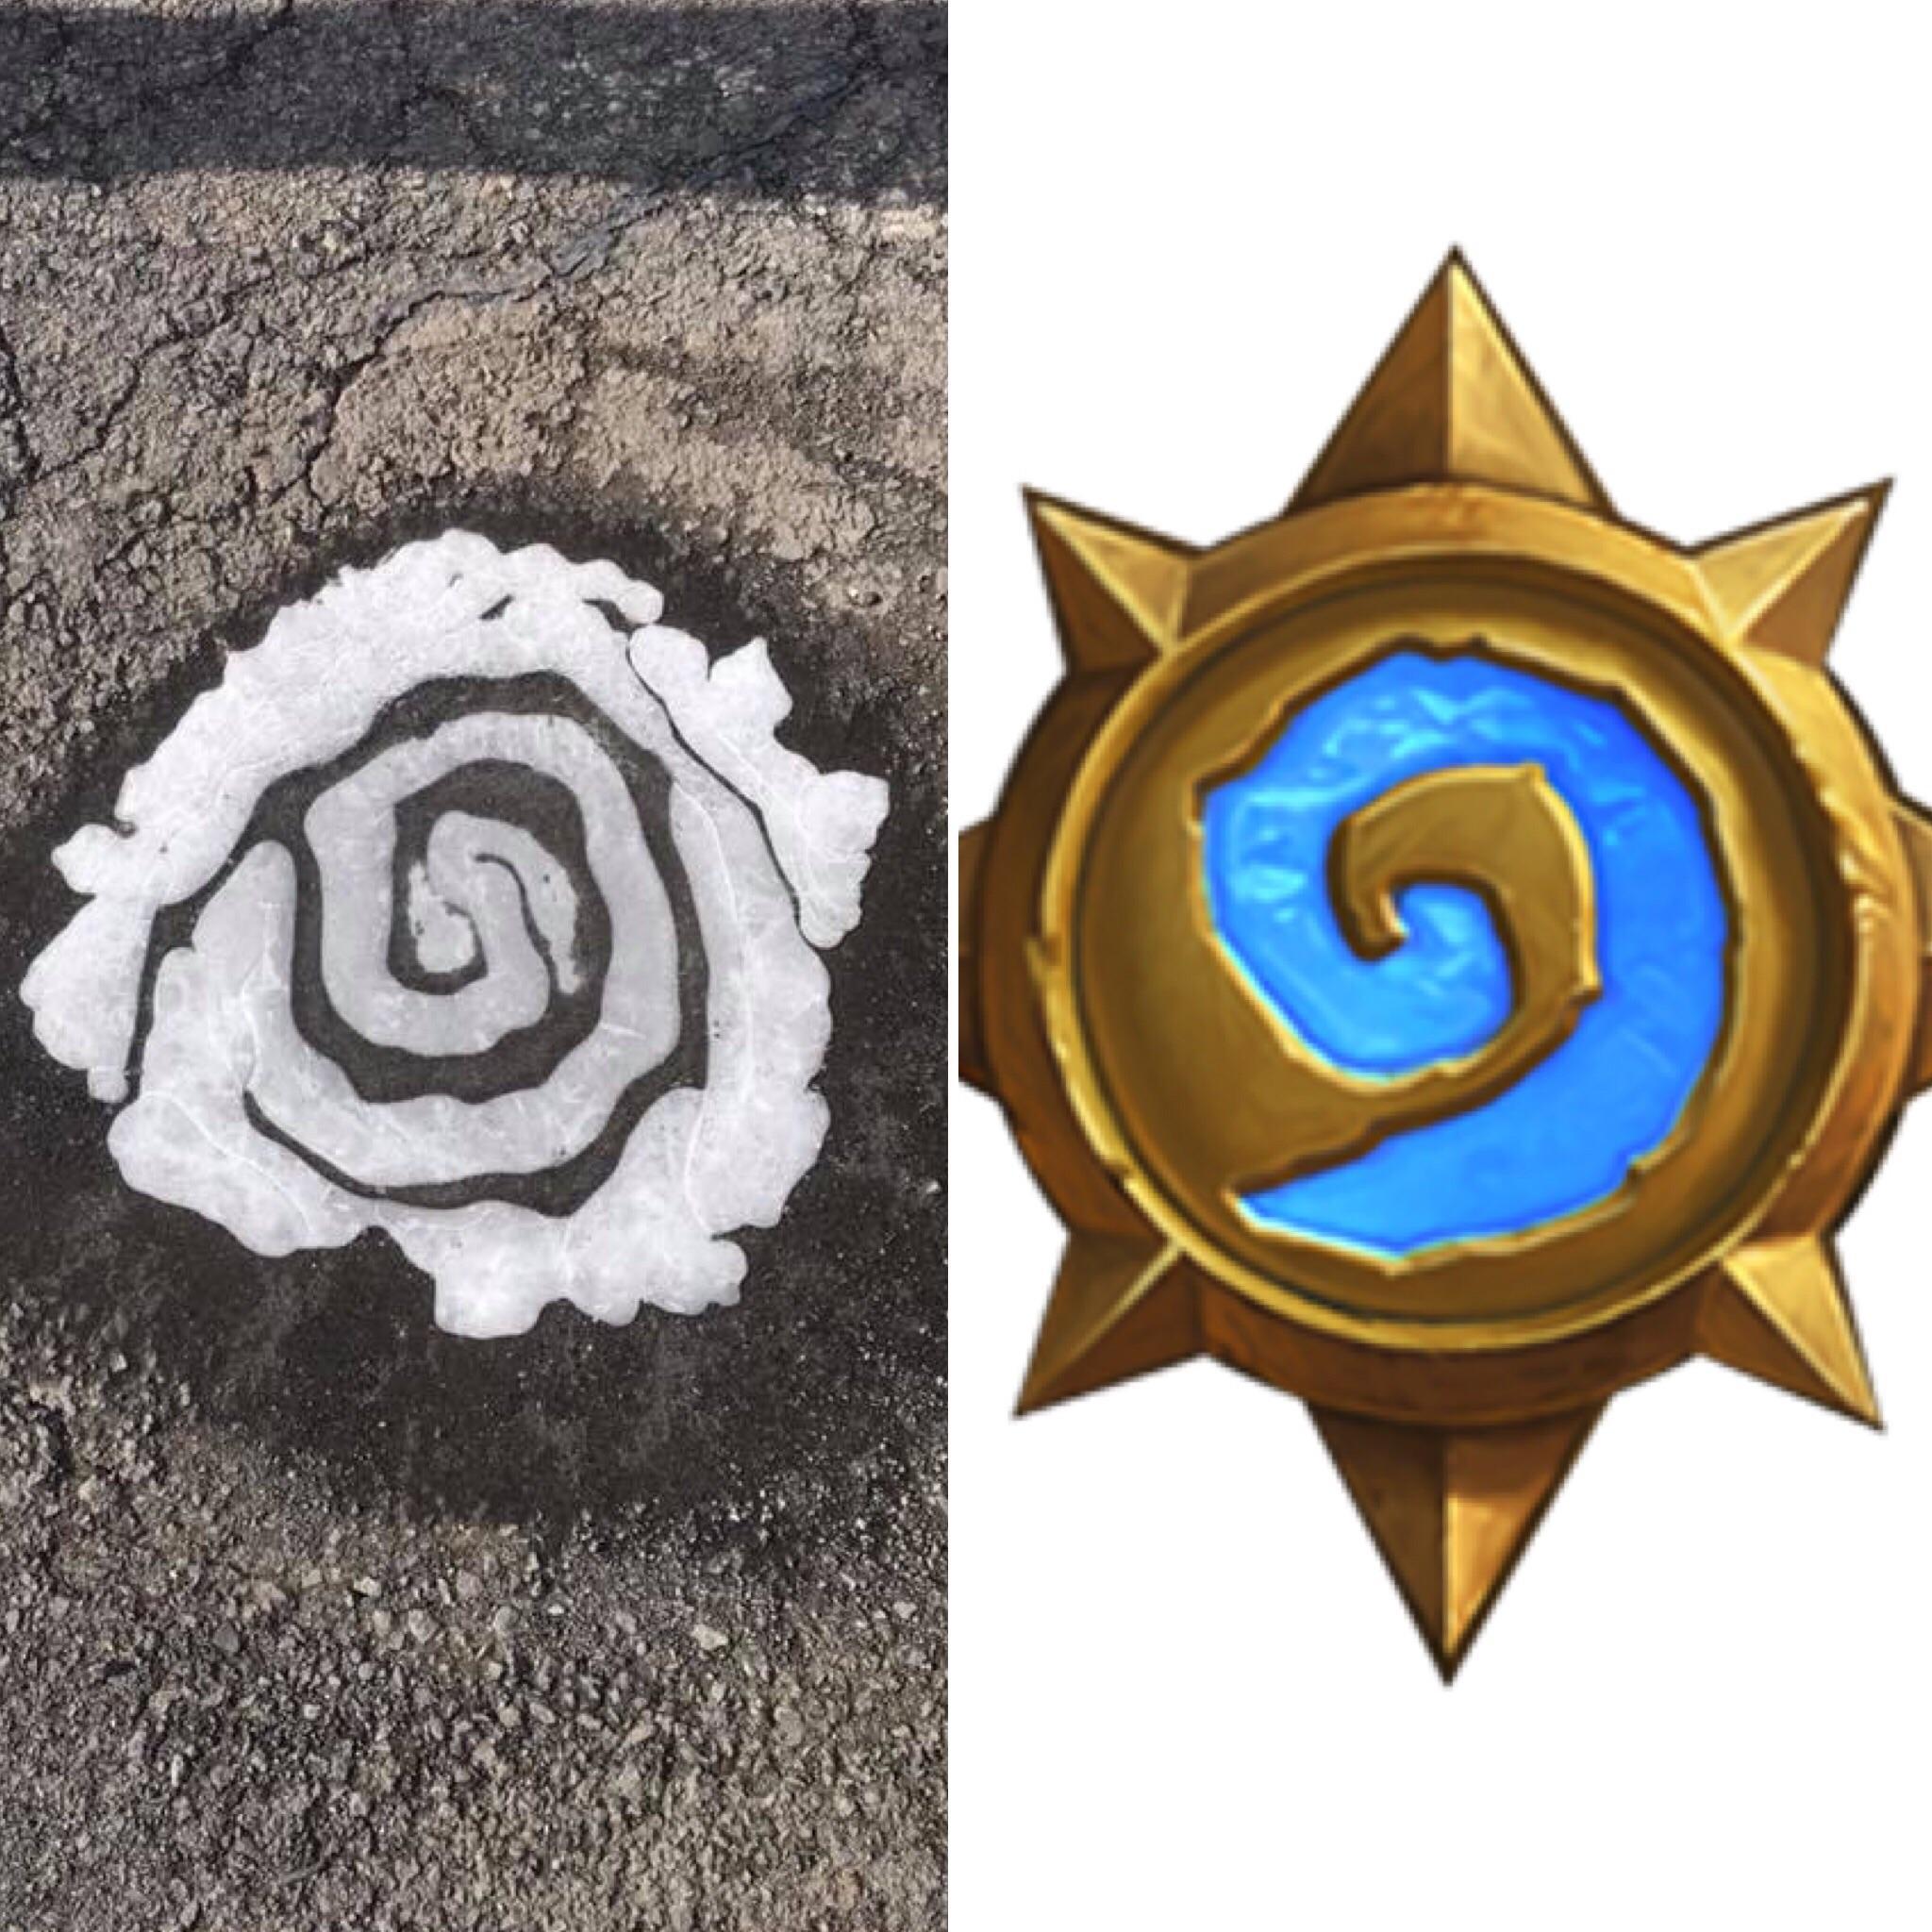 Hearthstone Logo - Found the hearthstone logo in a patch of ice